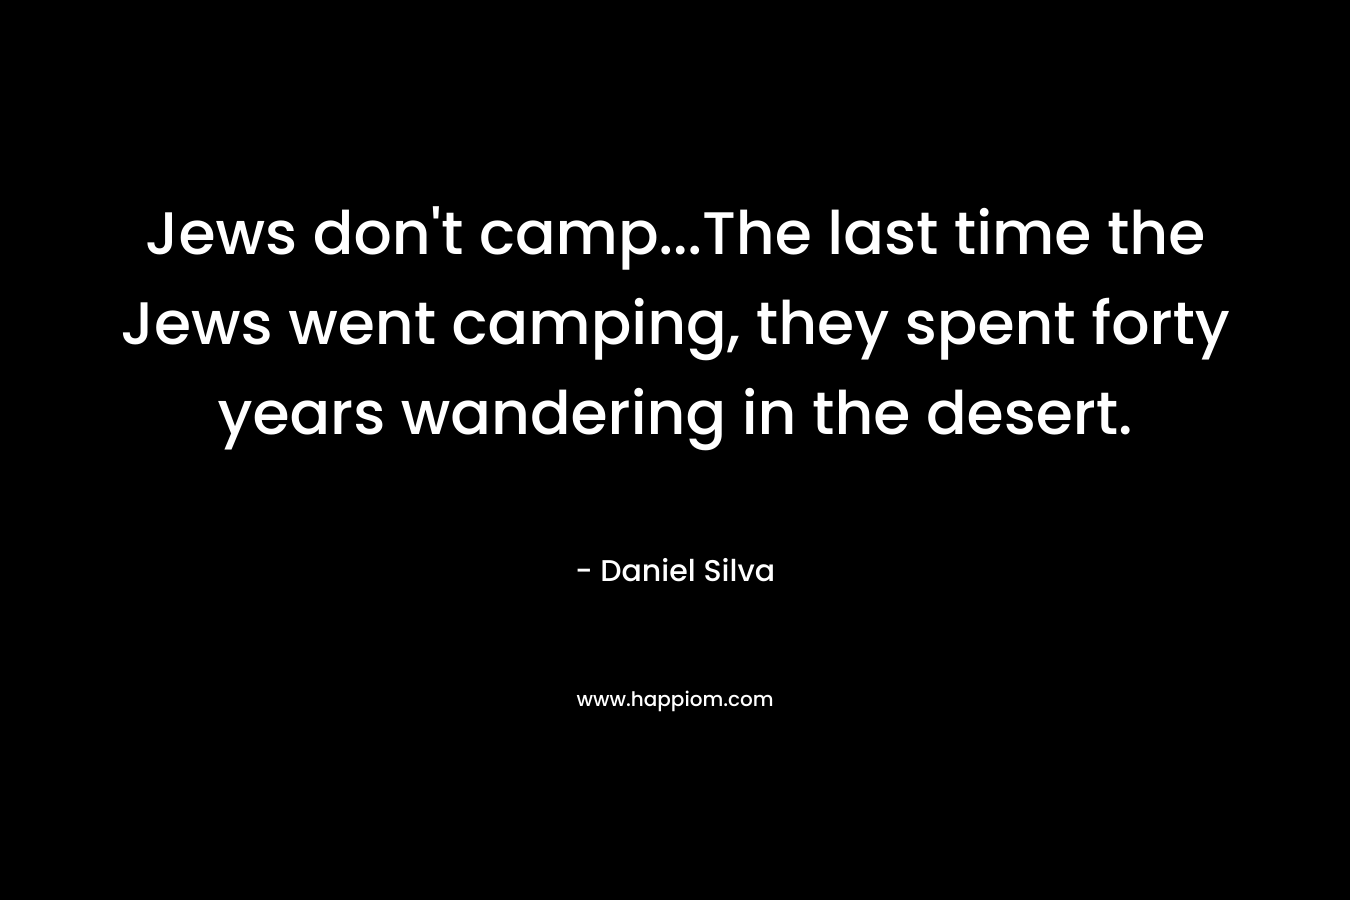 Jews don't camp...The last time the Jews went camping, they spent forty years wandering in the desert.